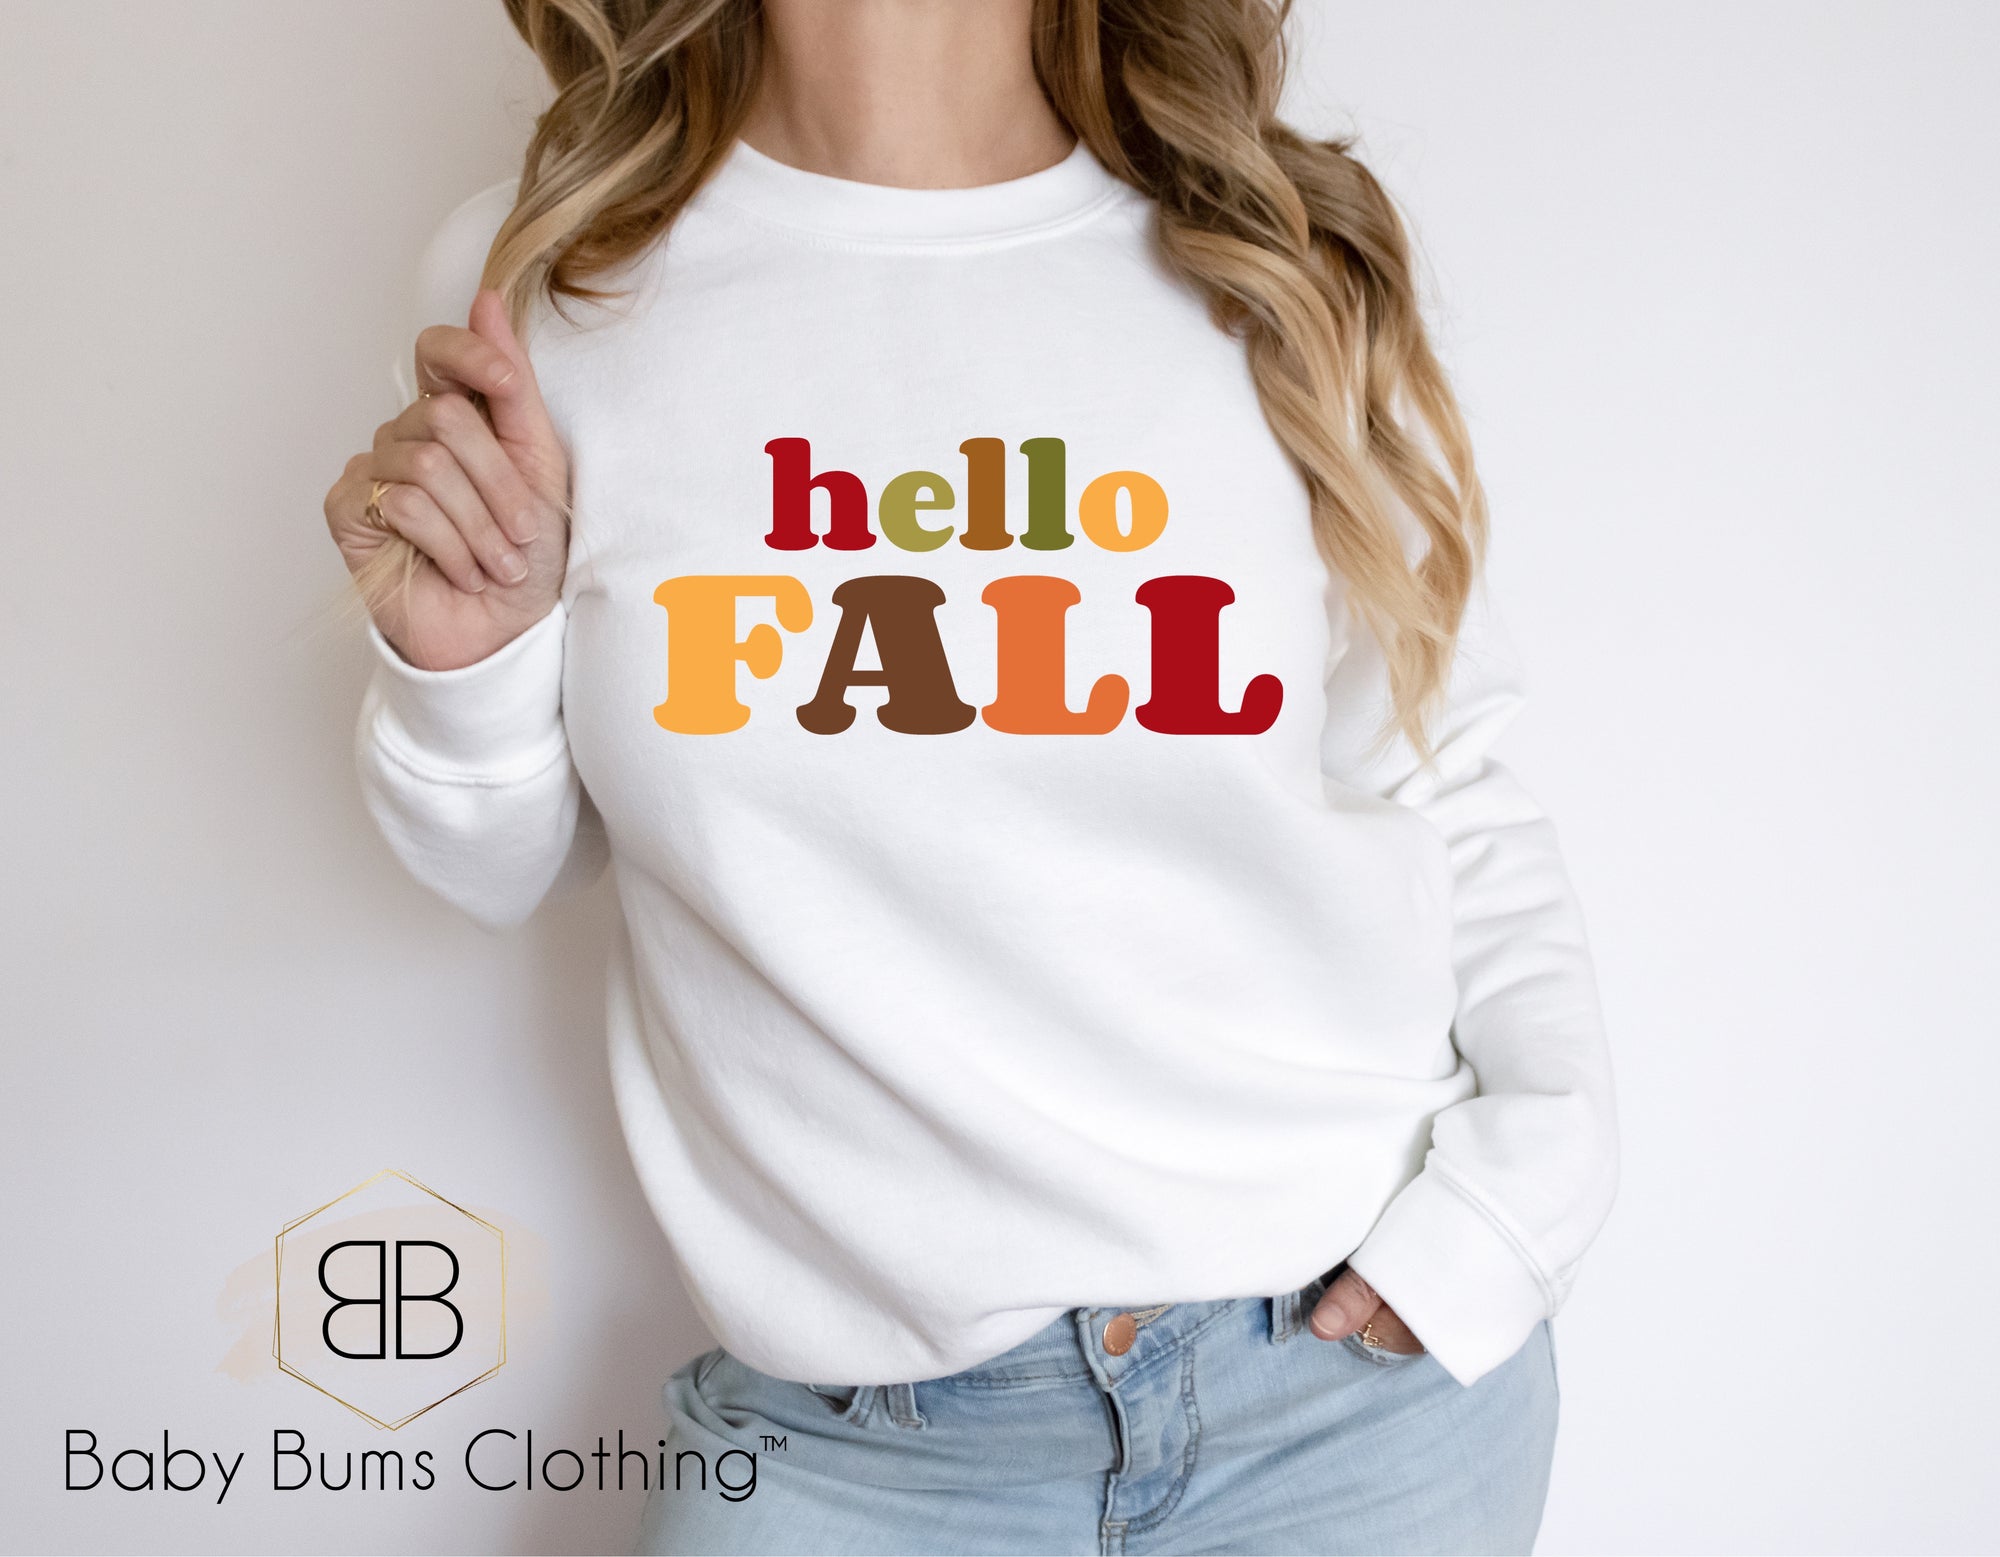 HELLO FALL MULTICOLOR  ADULT UNISEX T-SHIRT - Baby Bums Clothing 